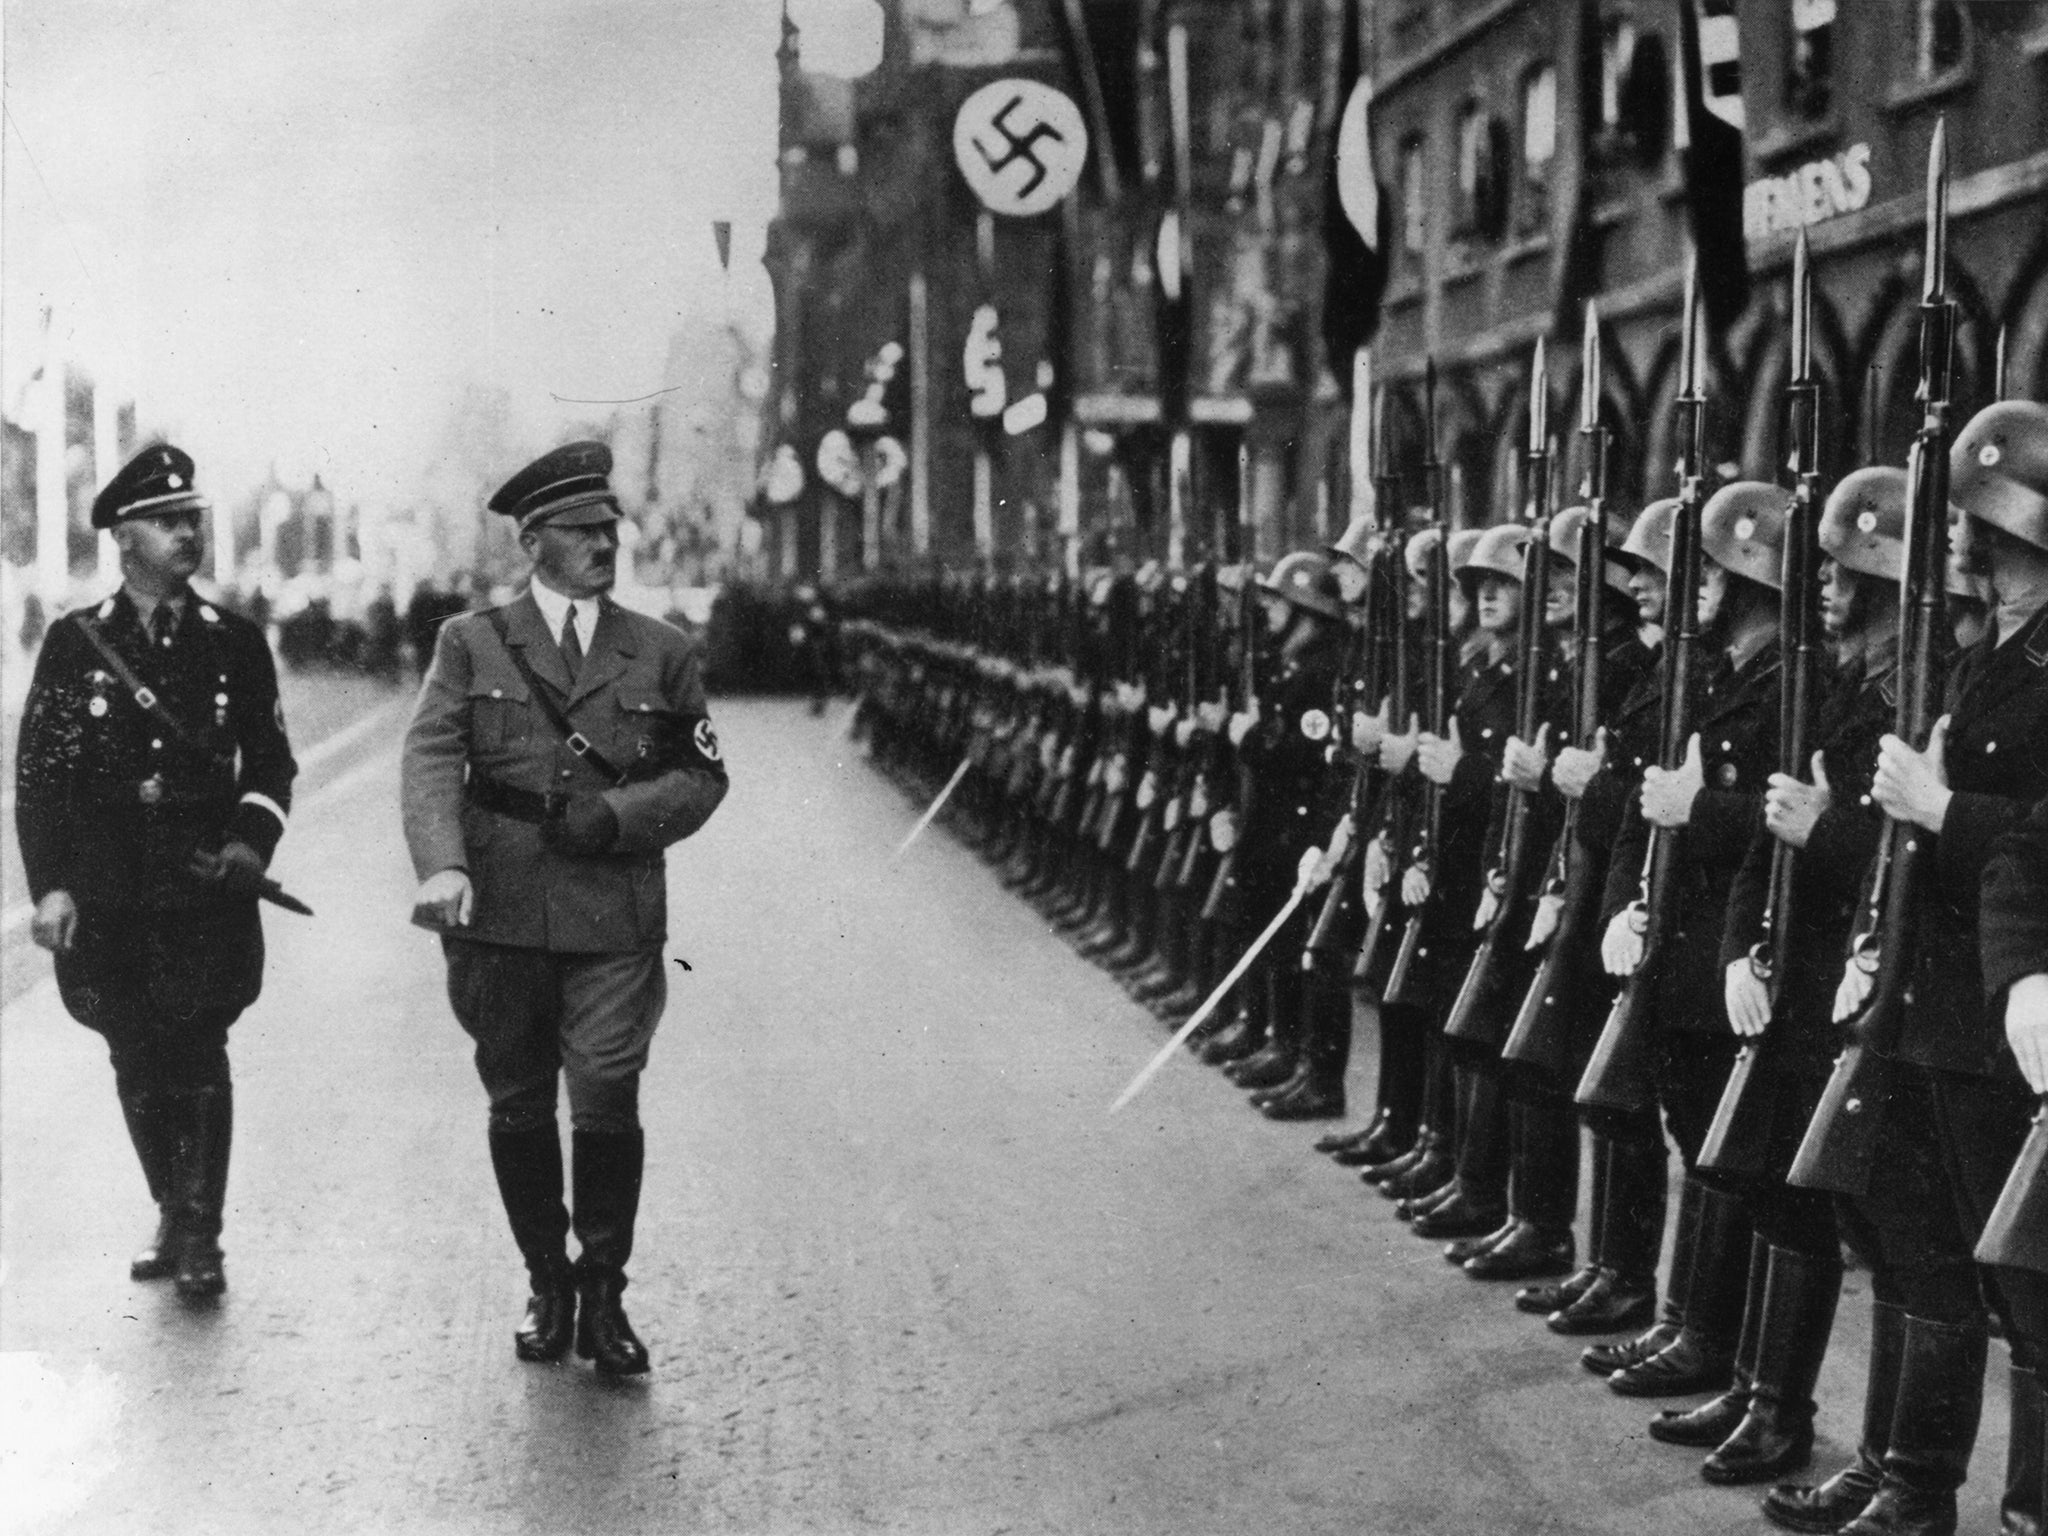 The Nazis subjugated Europe by force and murdered millions in the holocaust